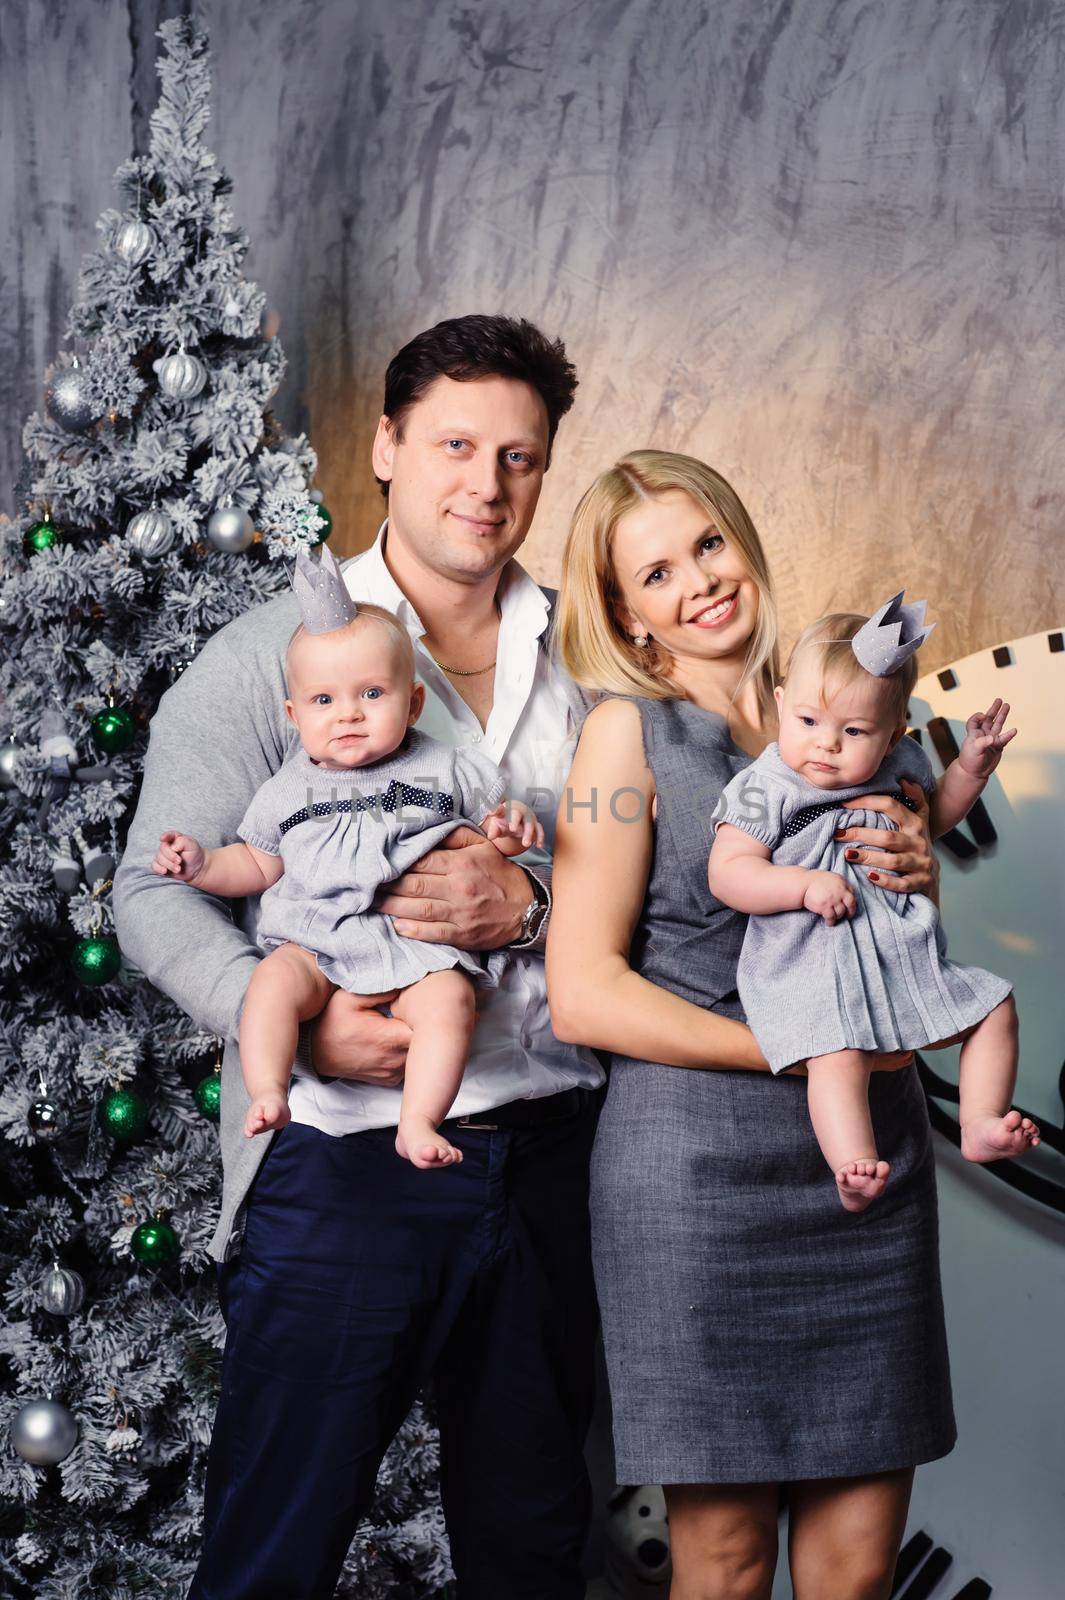 A happy big family with twin children in the New Year's interior of the house on the background of a Christmas tree.